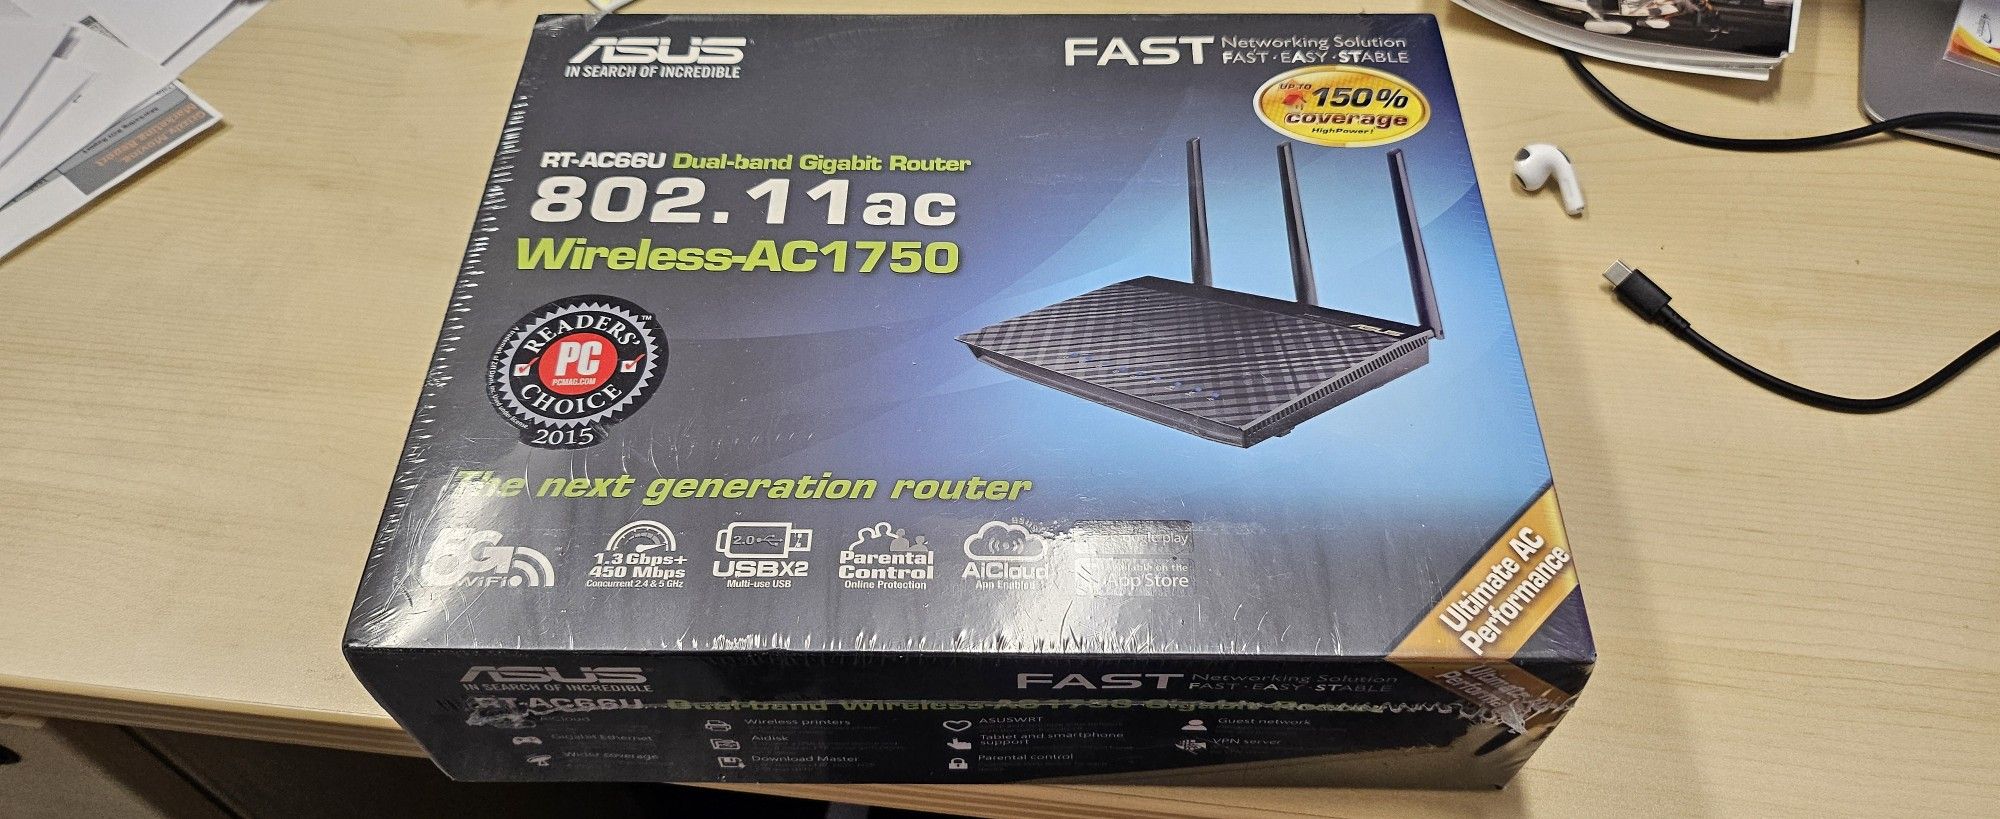 BRAND NEW UNOPENED Asus wireless router RT-AC66U Dual-Band Wireless- AC1750 Gigabit Router